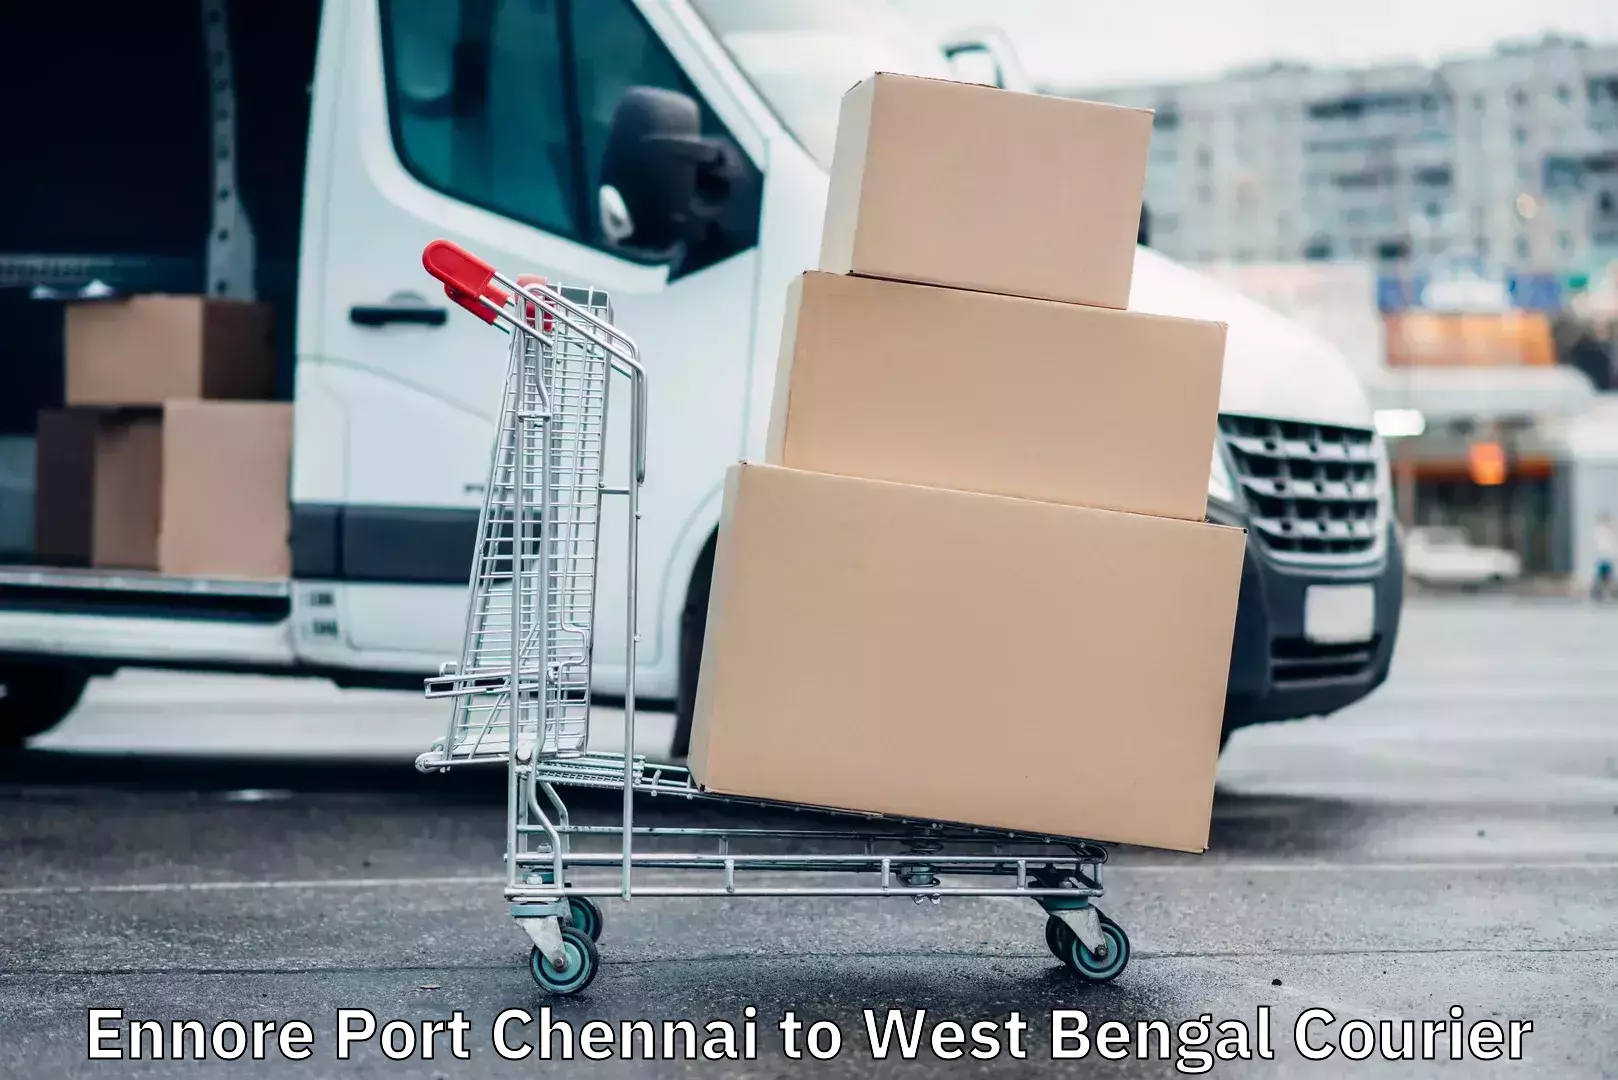 Automated parcel services Ennore Port Chennai to West Bengal